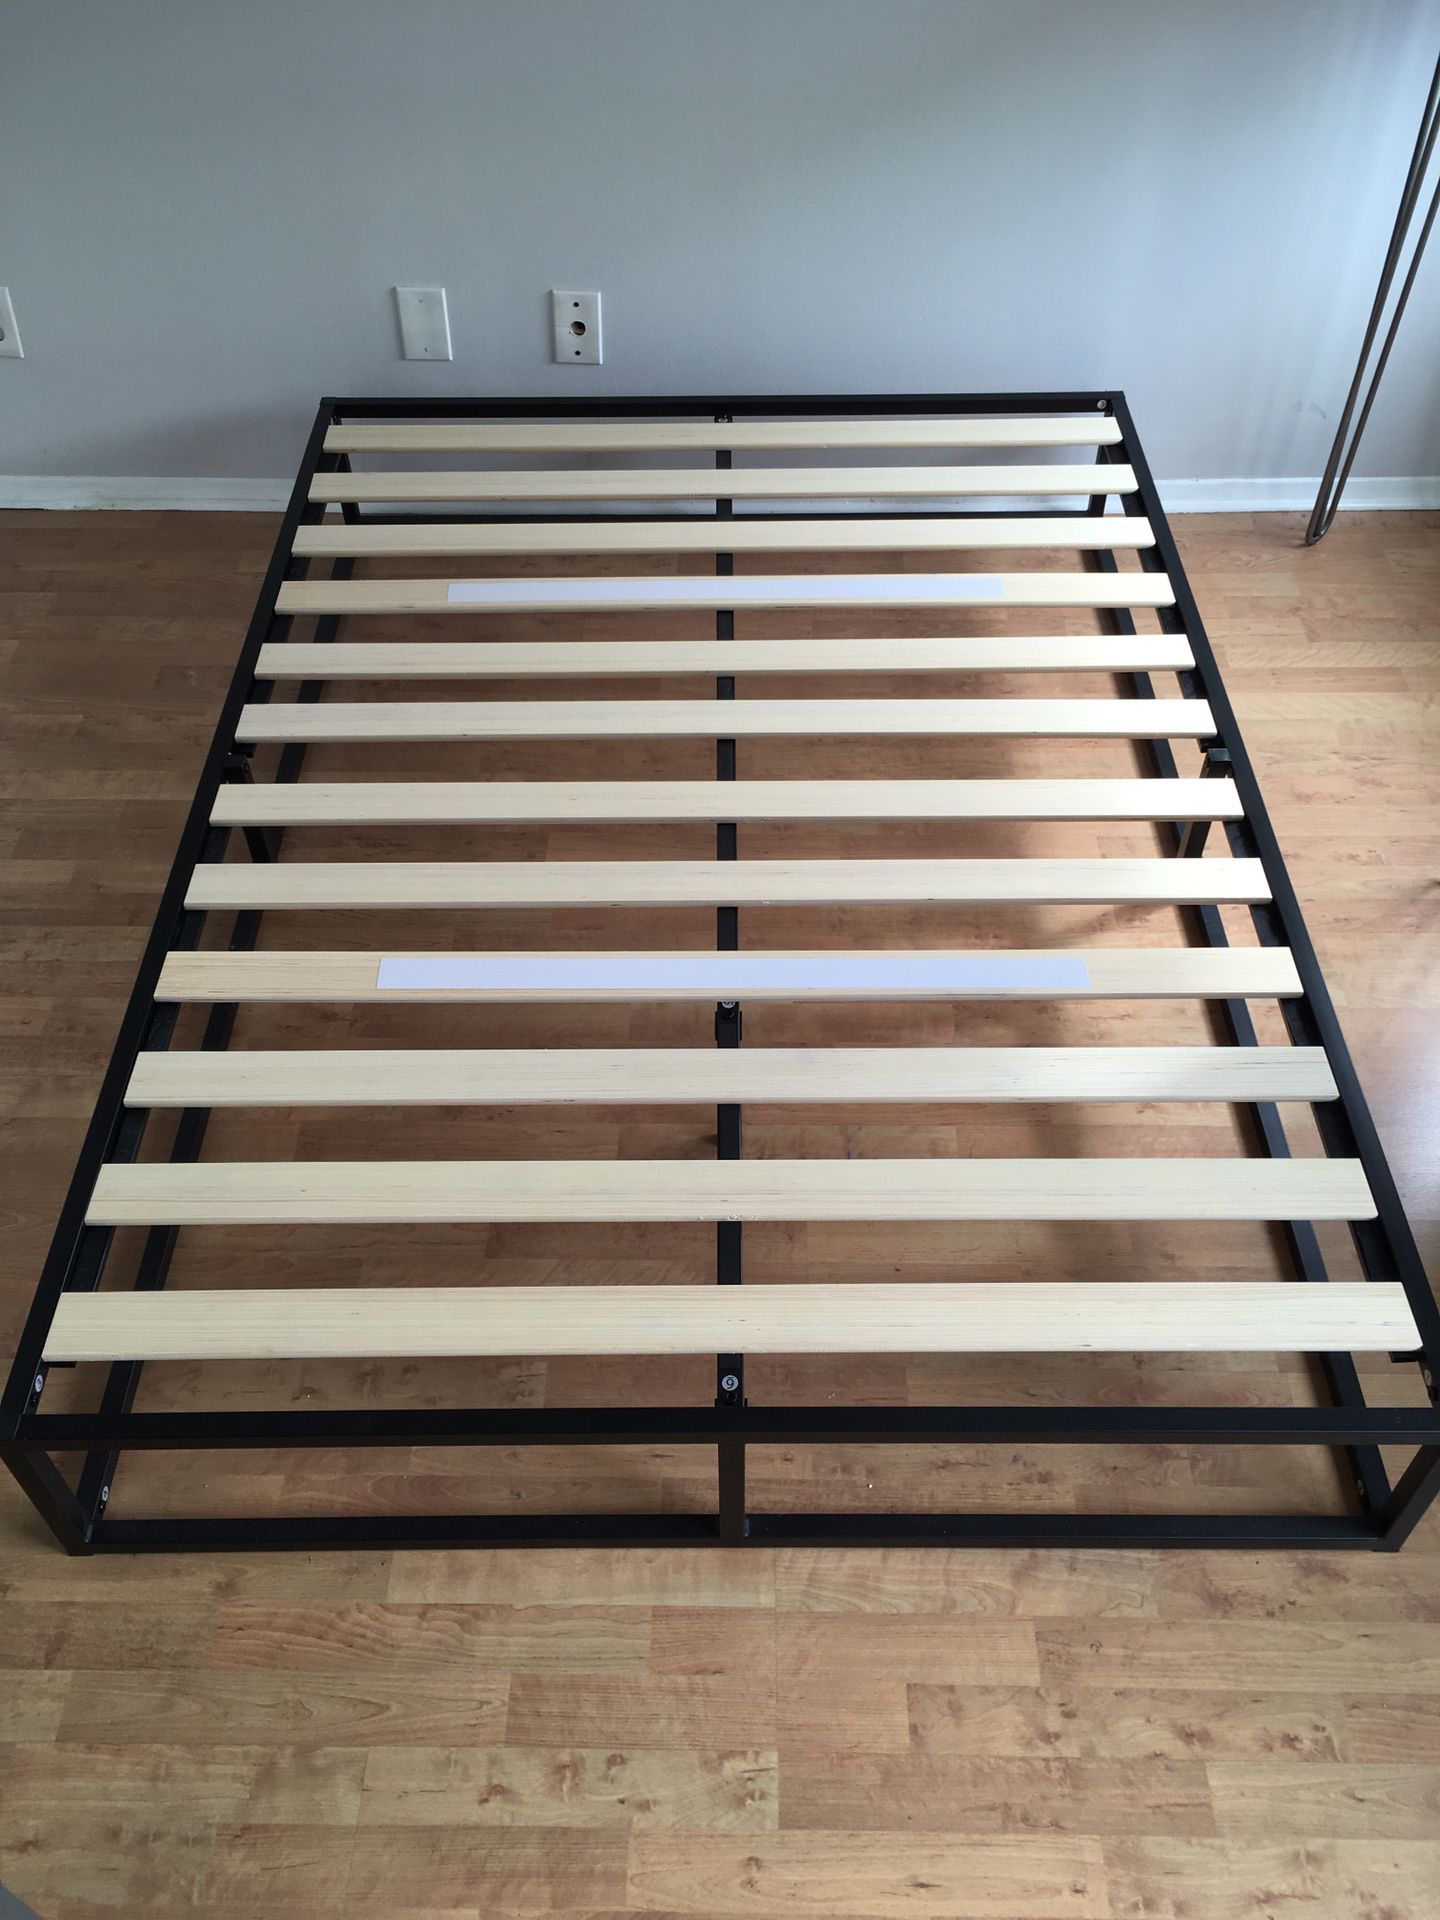 Metal Bed Frame - Full (7 months old; rarely used)